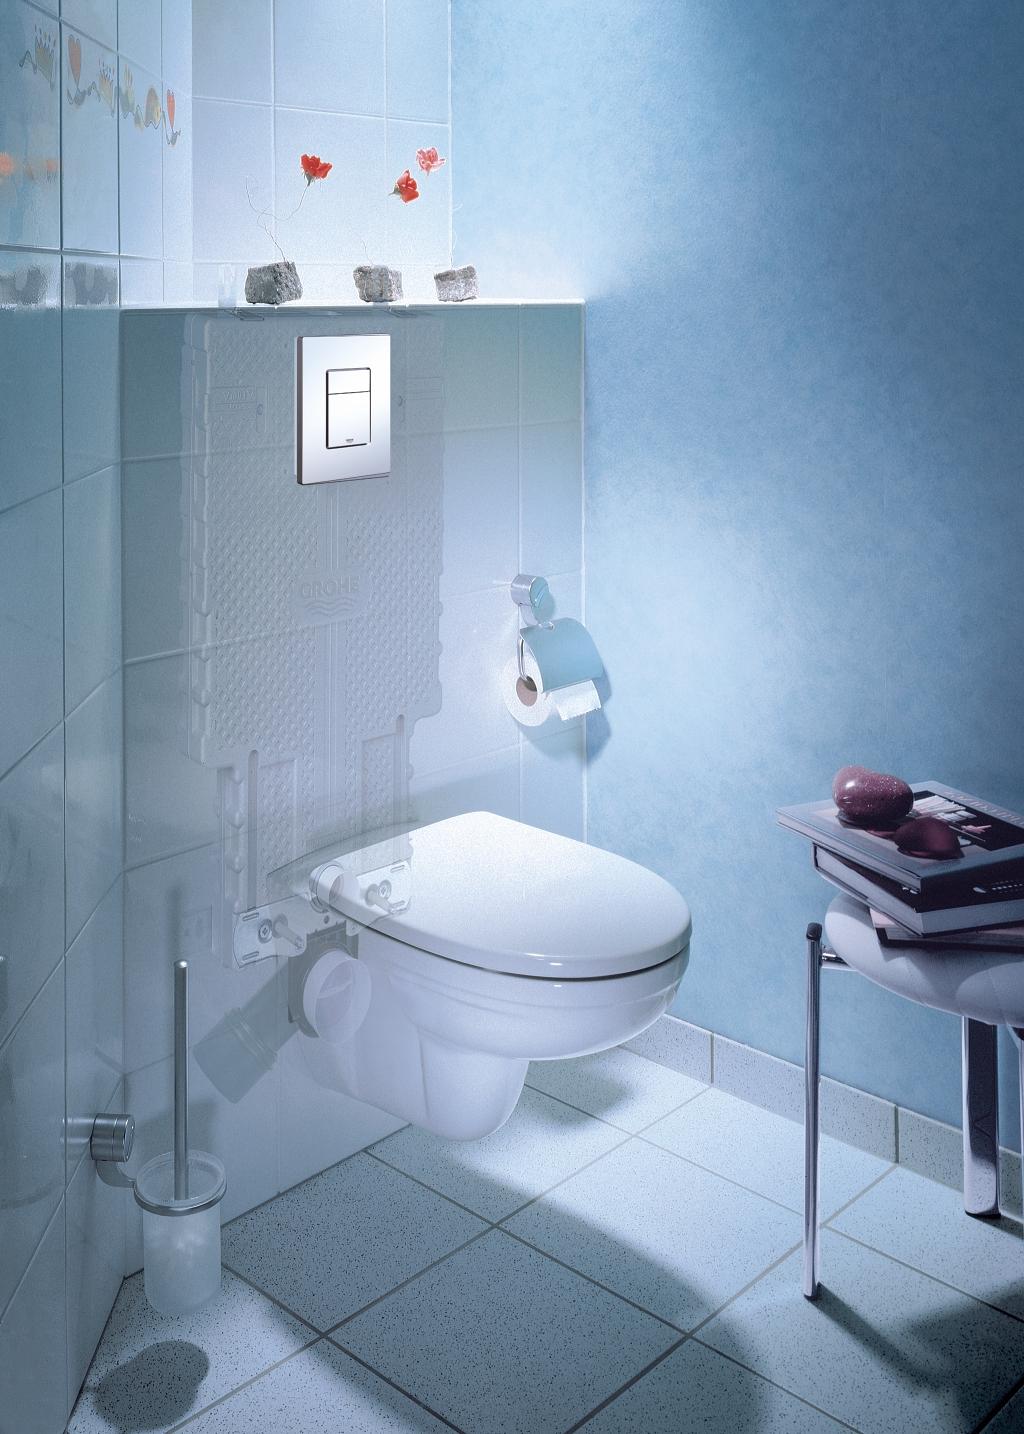 VAAL Urban Life Rimless Wall Hung Toilet Pan & GROHE Concealed Cistern - Artisans Trade Depot